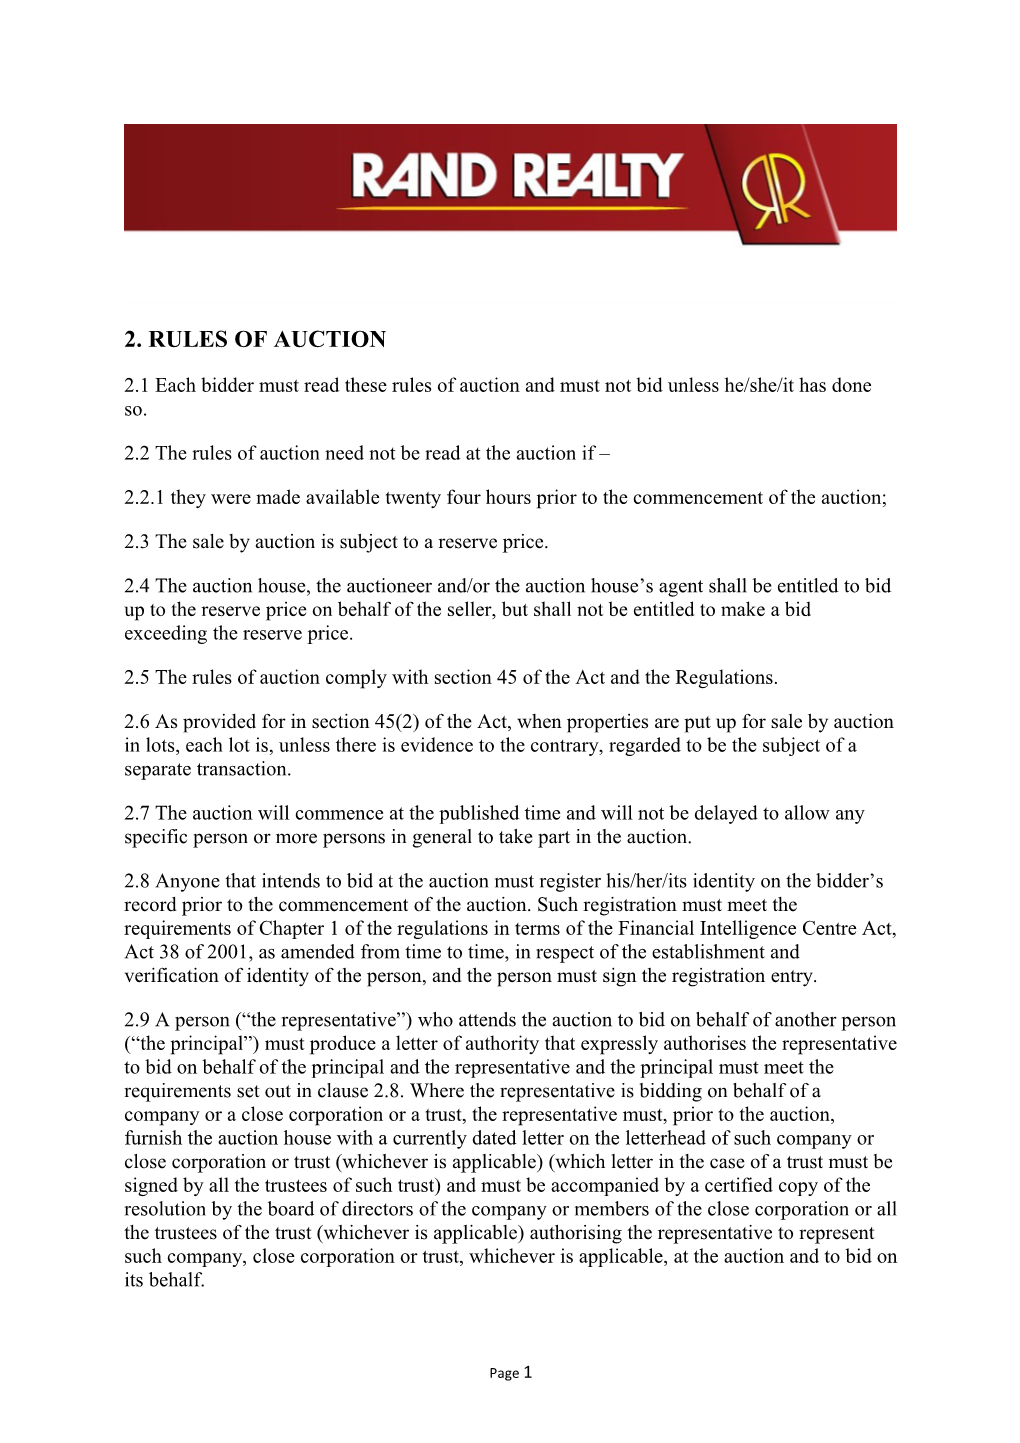 2. Rules of Auction